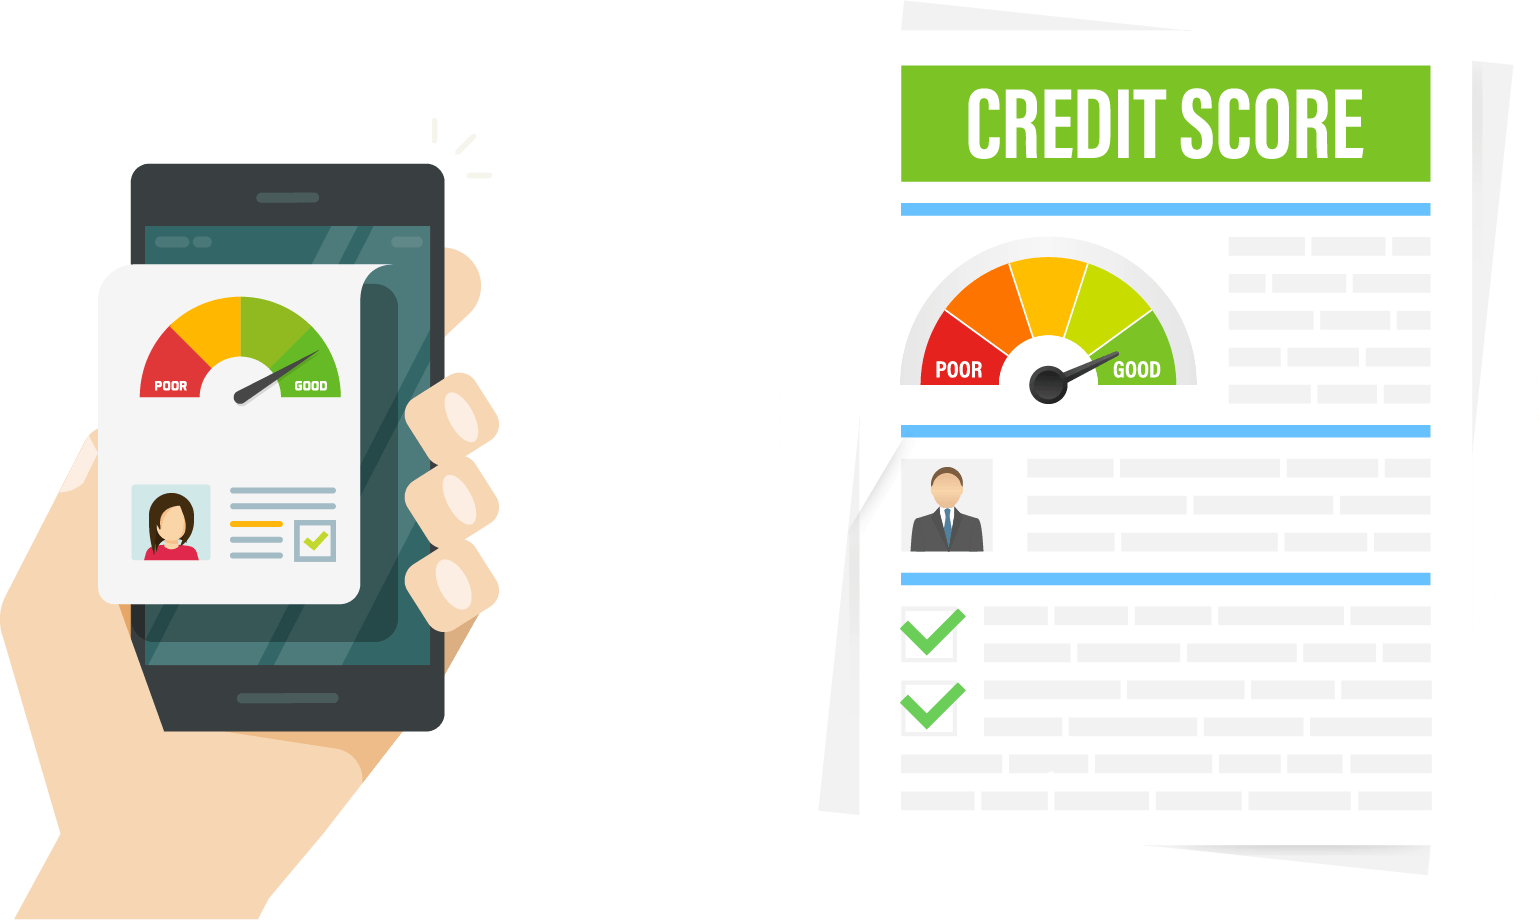 What is the Difference Between Credit Score and CIBIL Score